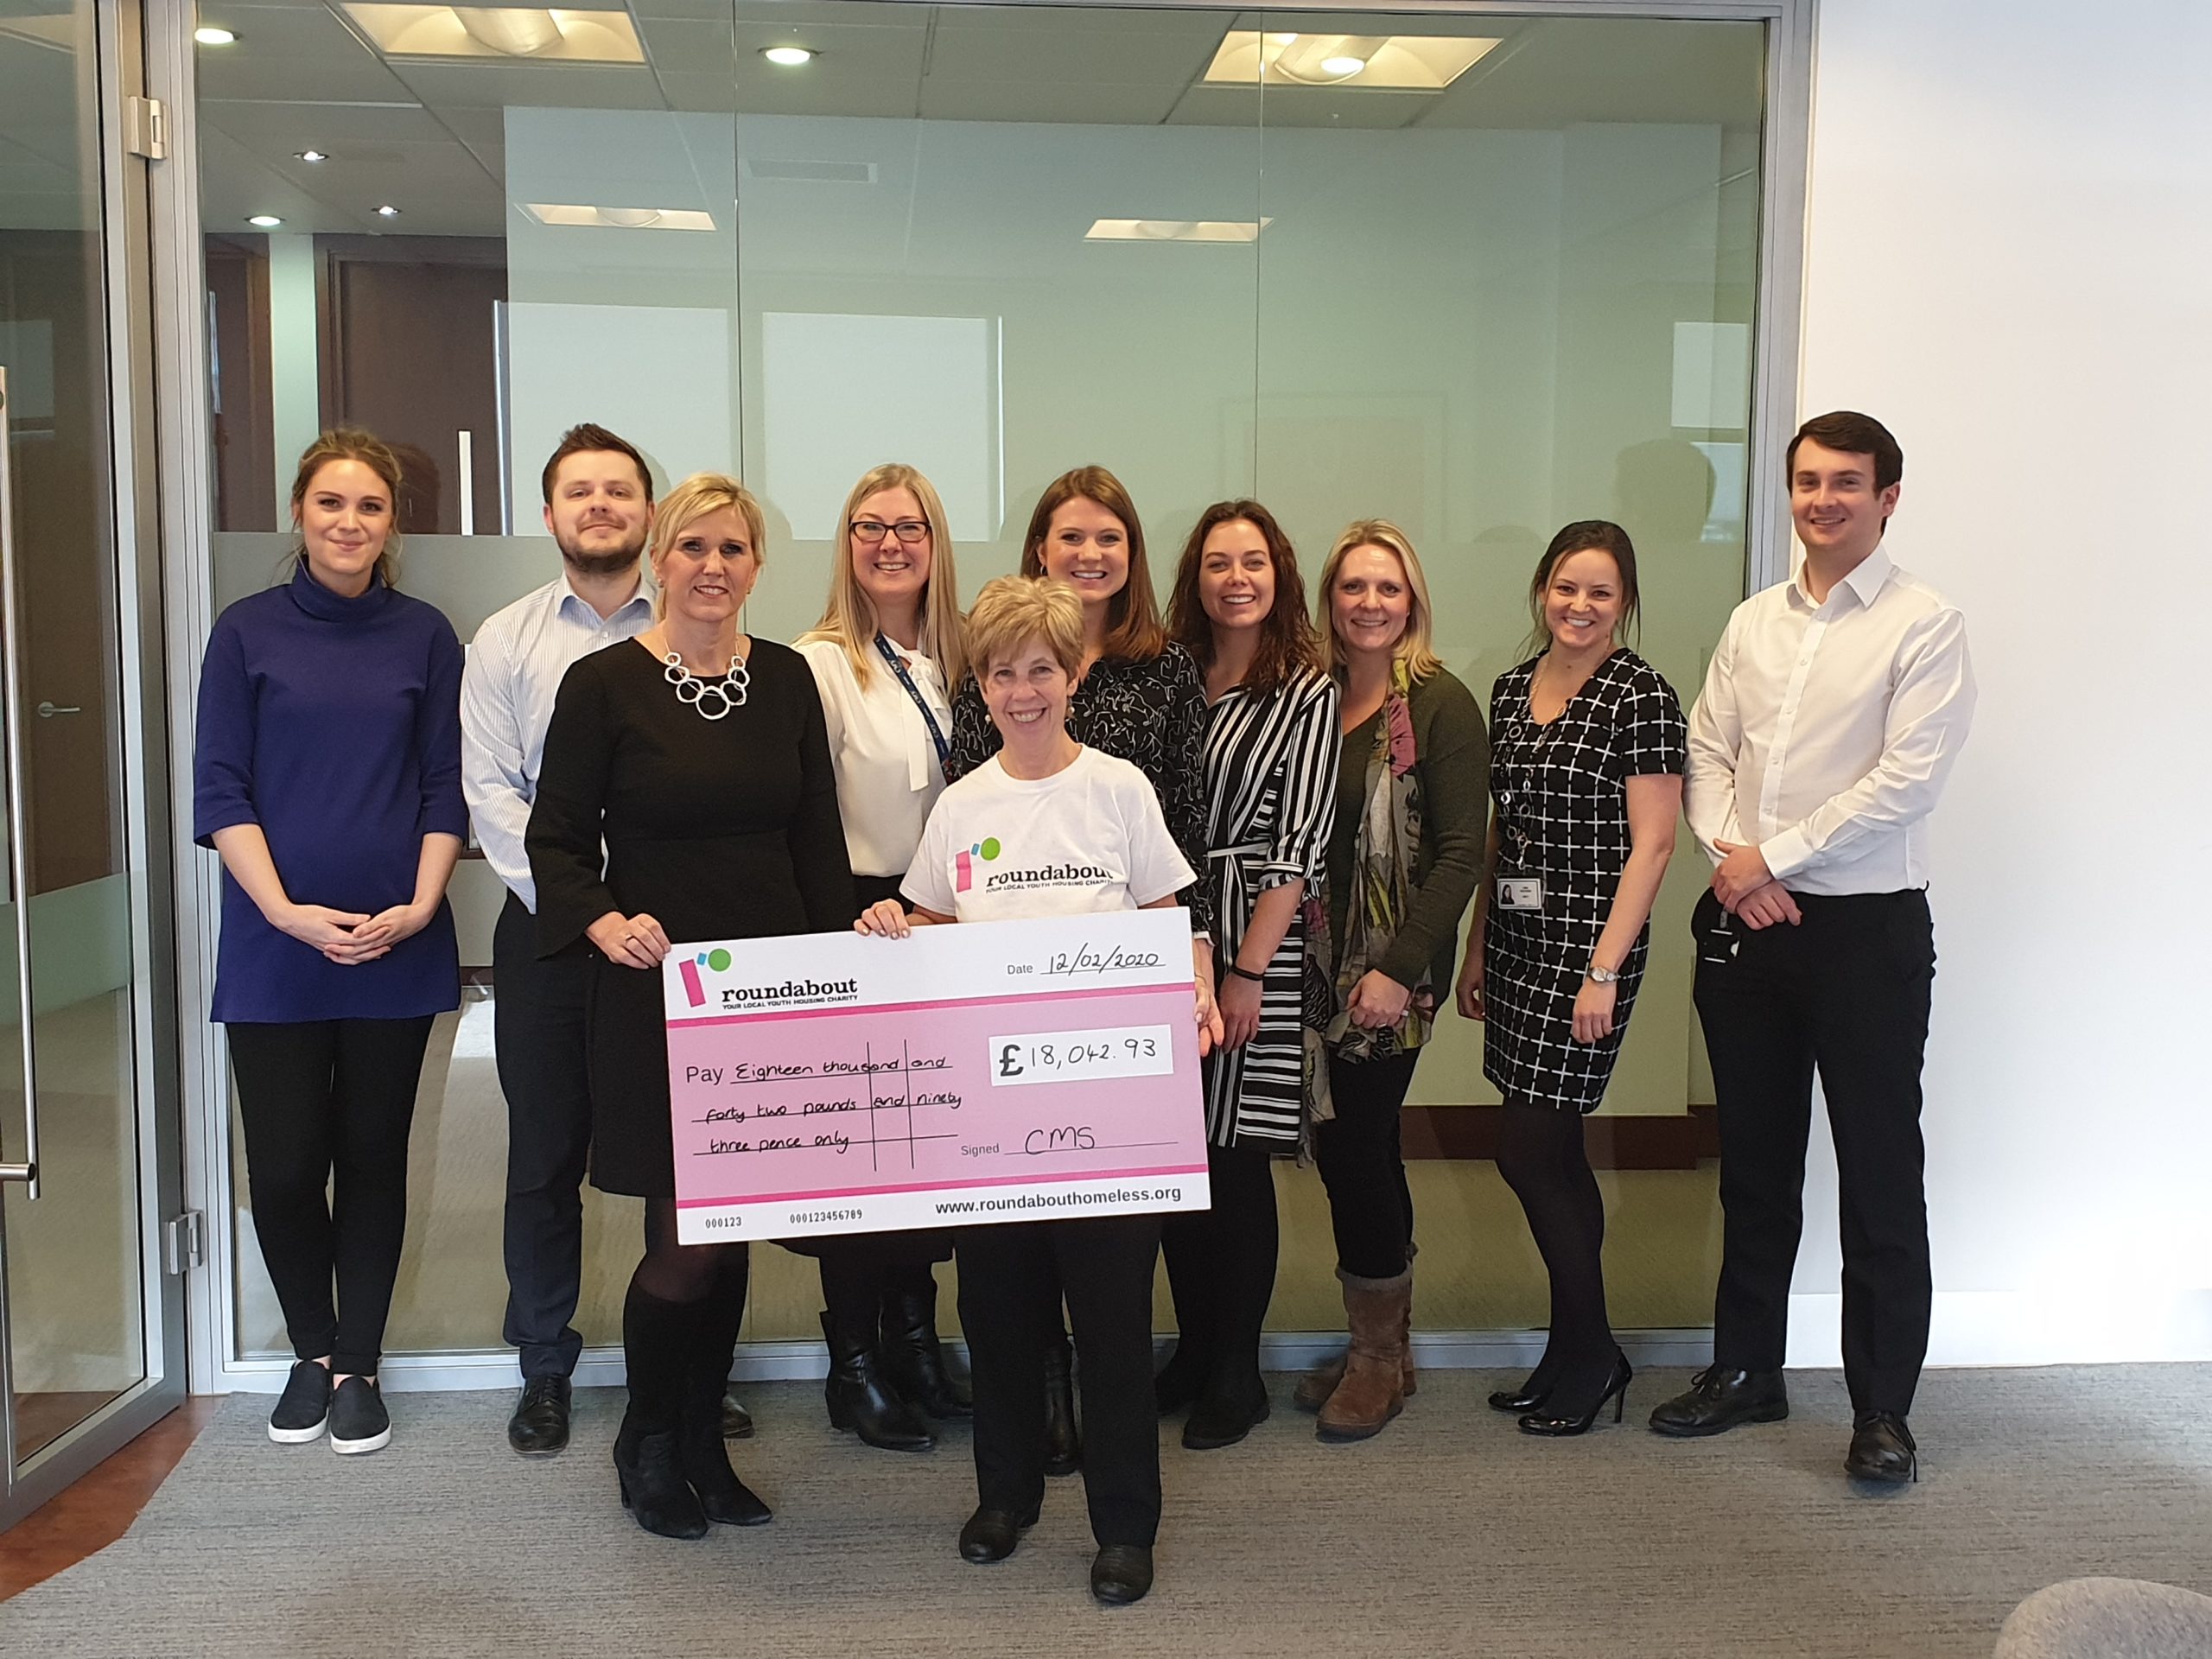 CMS Sheffield raises over £18,000 | Roundabout Homeless Charity